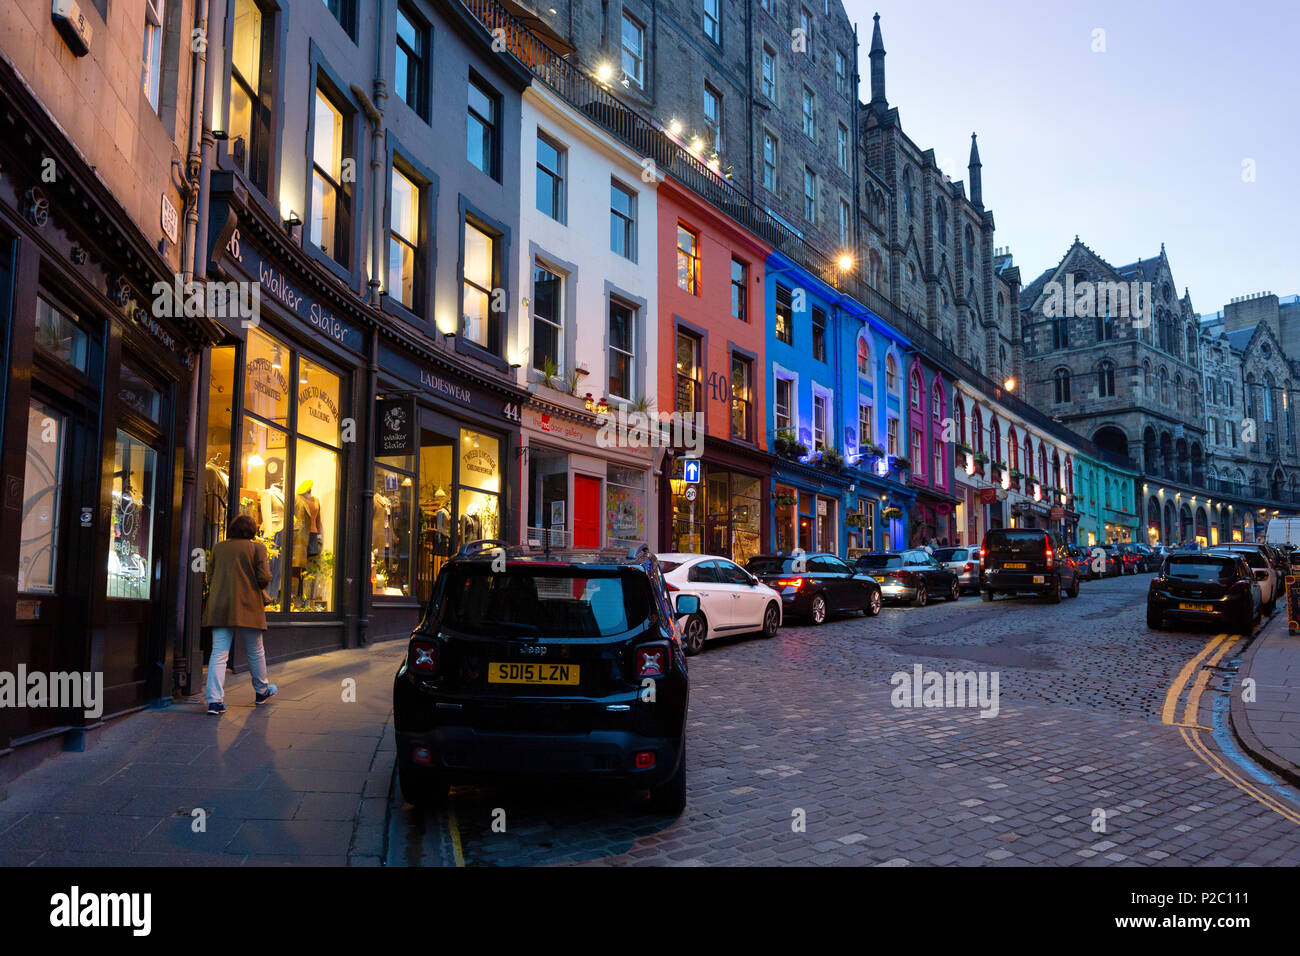 West Bow, Edinburgh old town at night with colourful buildings and cobbled streets; Edinburgh UNESCO World Heritage Site, Edinburgh Scotland UK Stock Photo